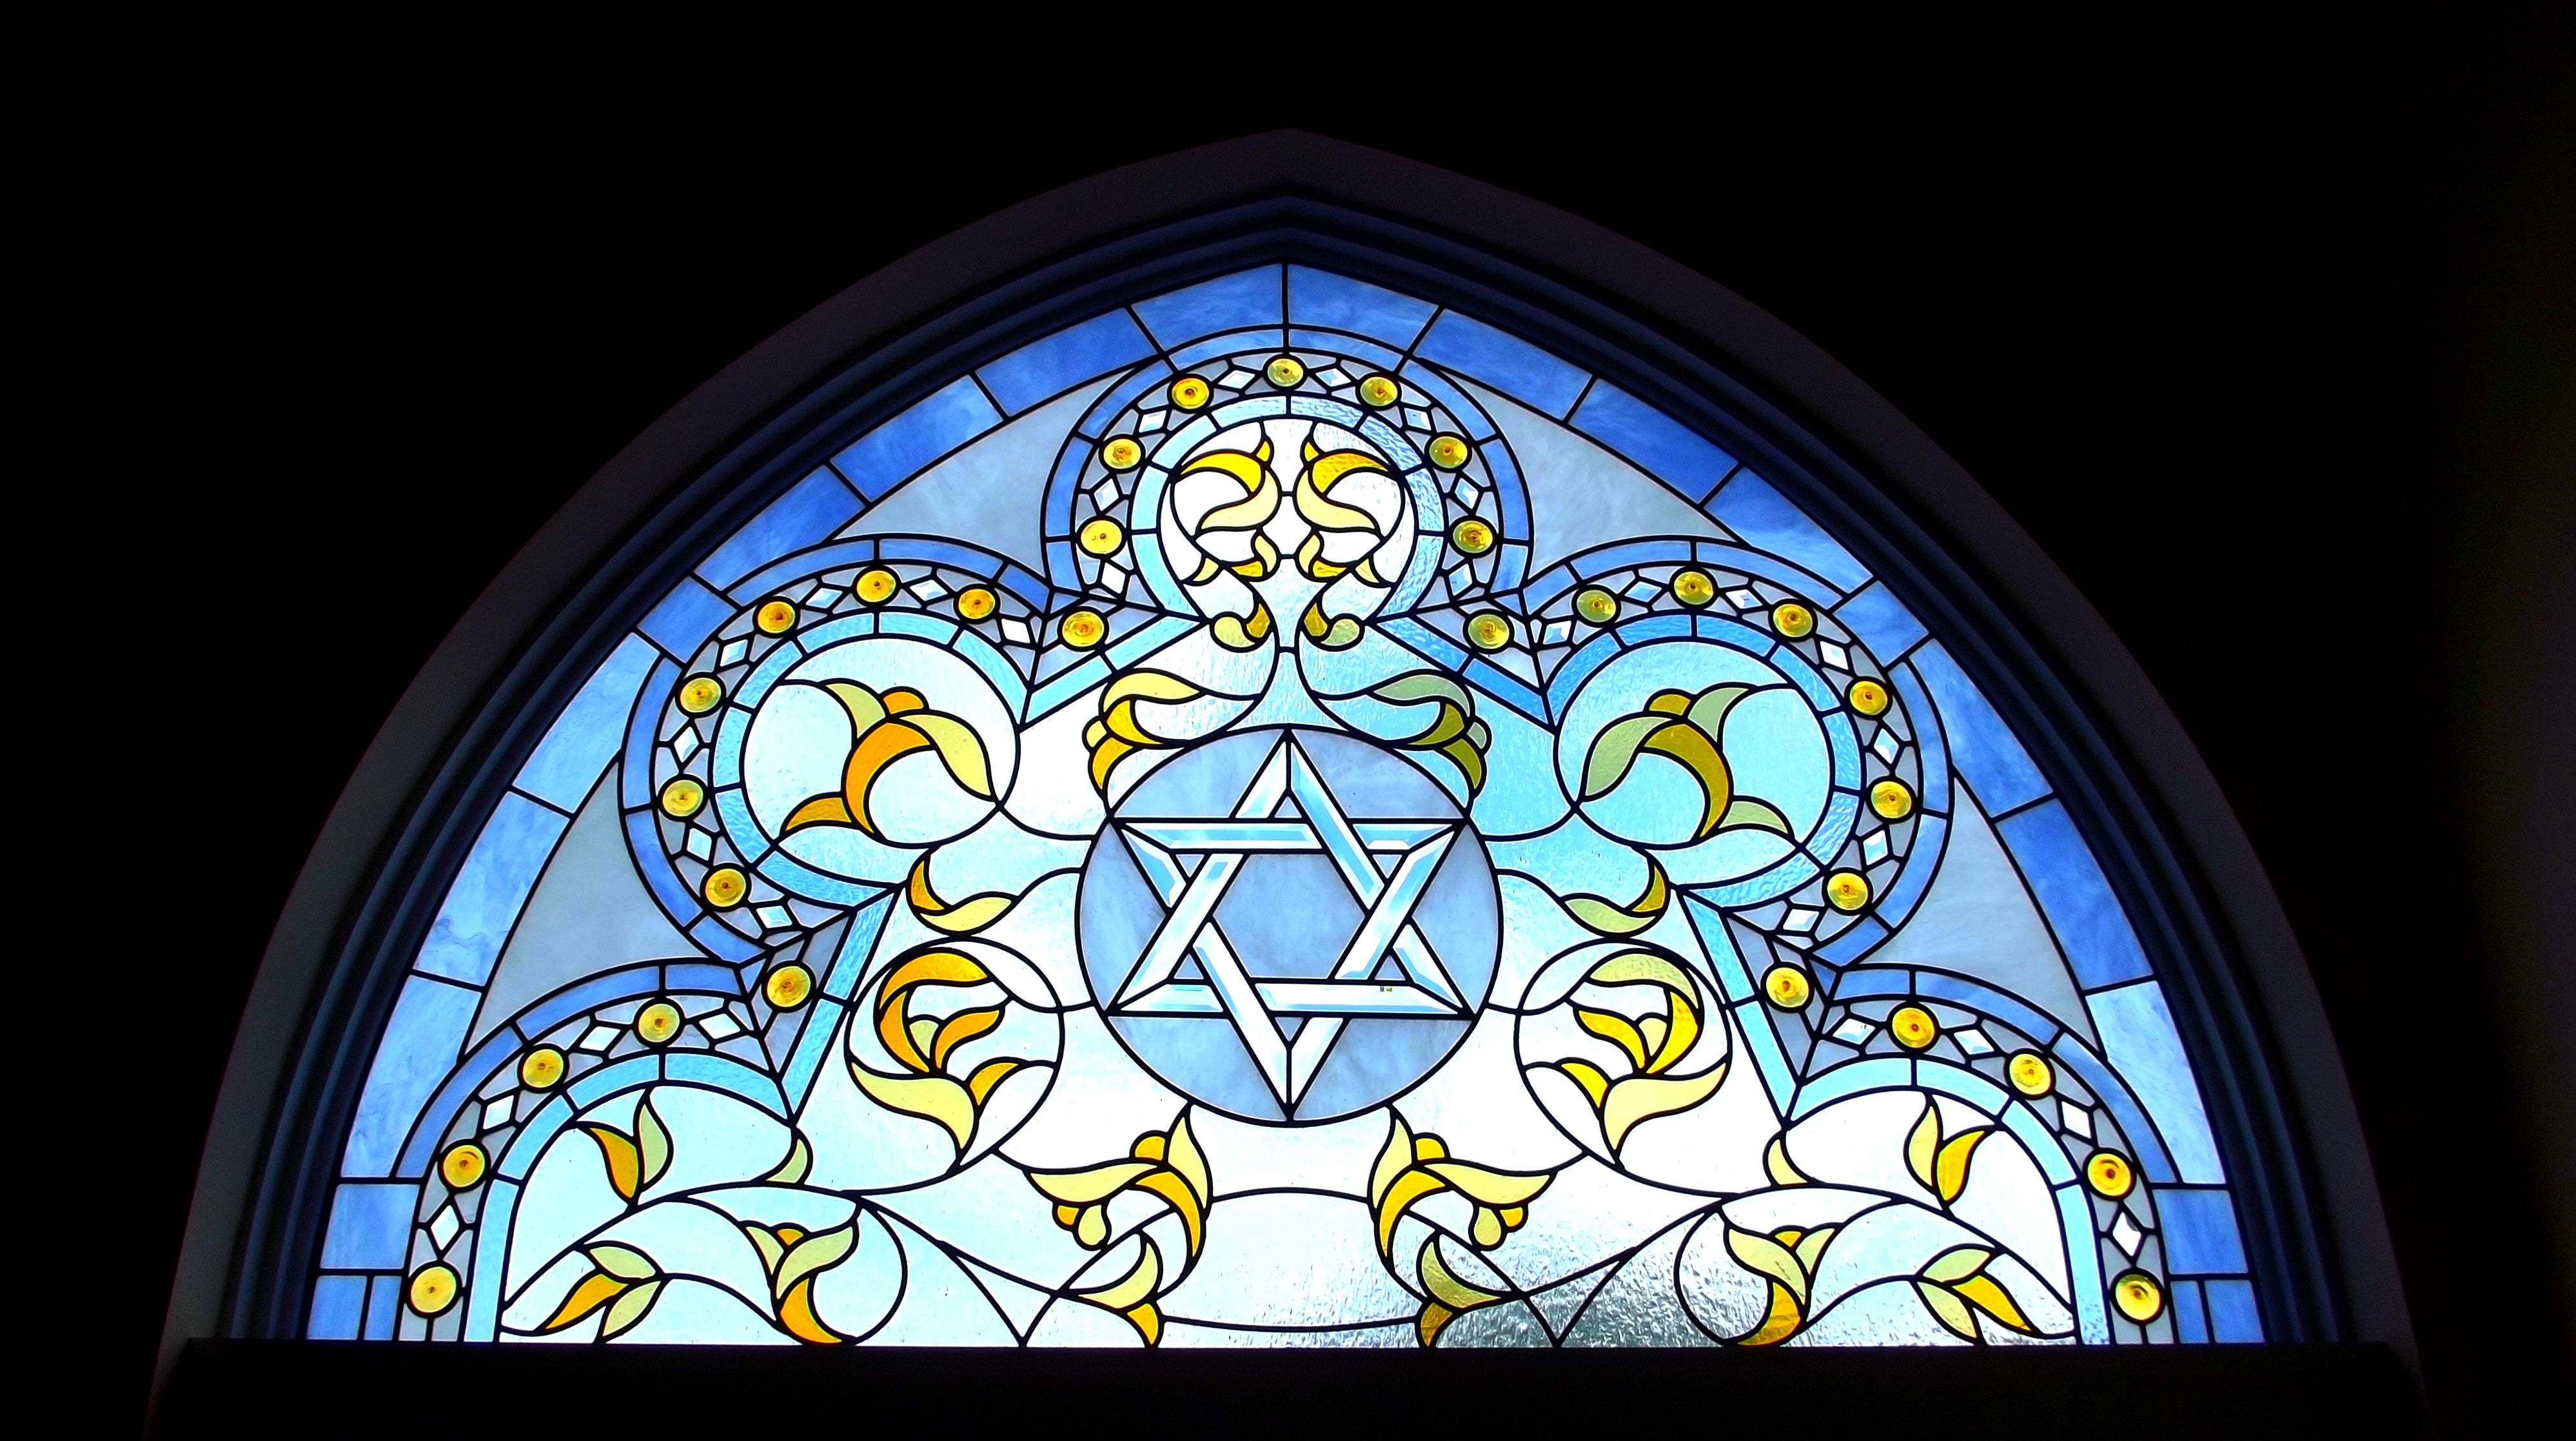 Israel and the Jewish People Now – How to Support Religious Pluralism in Israel